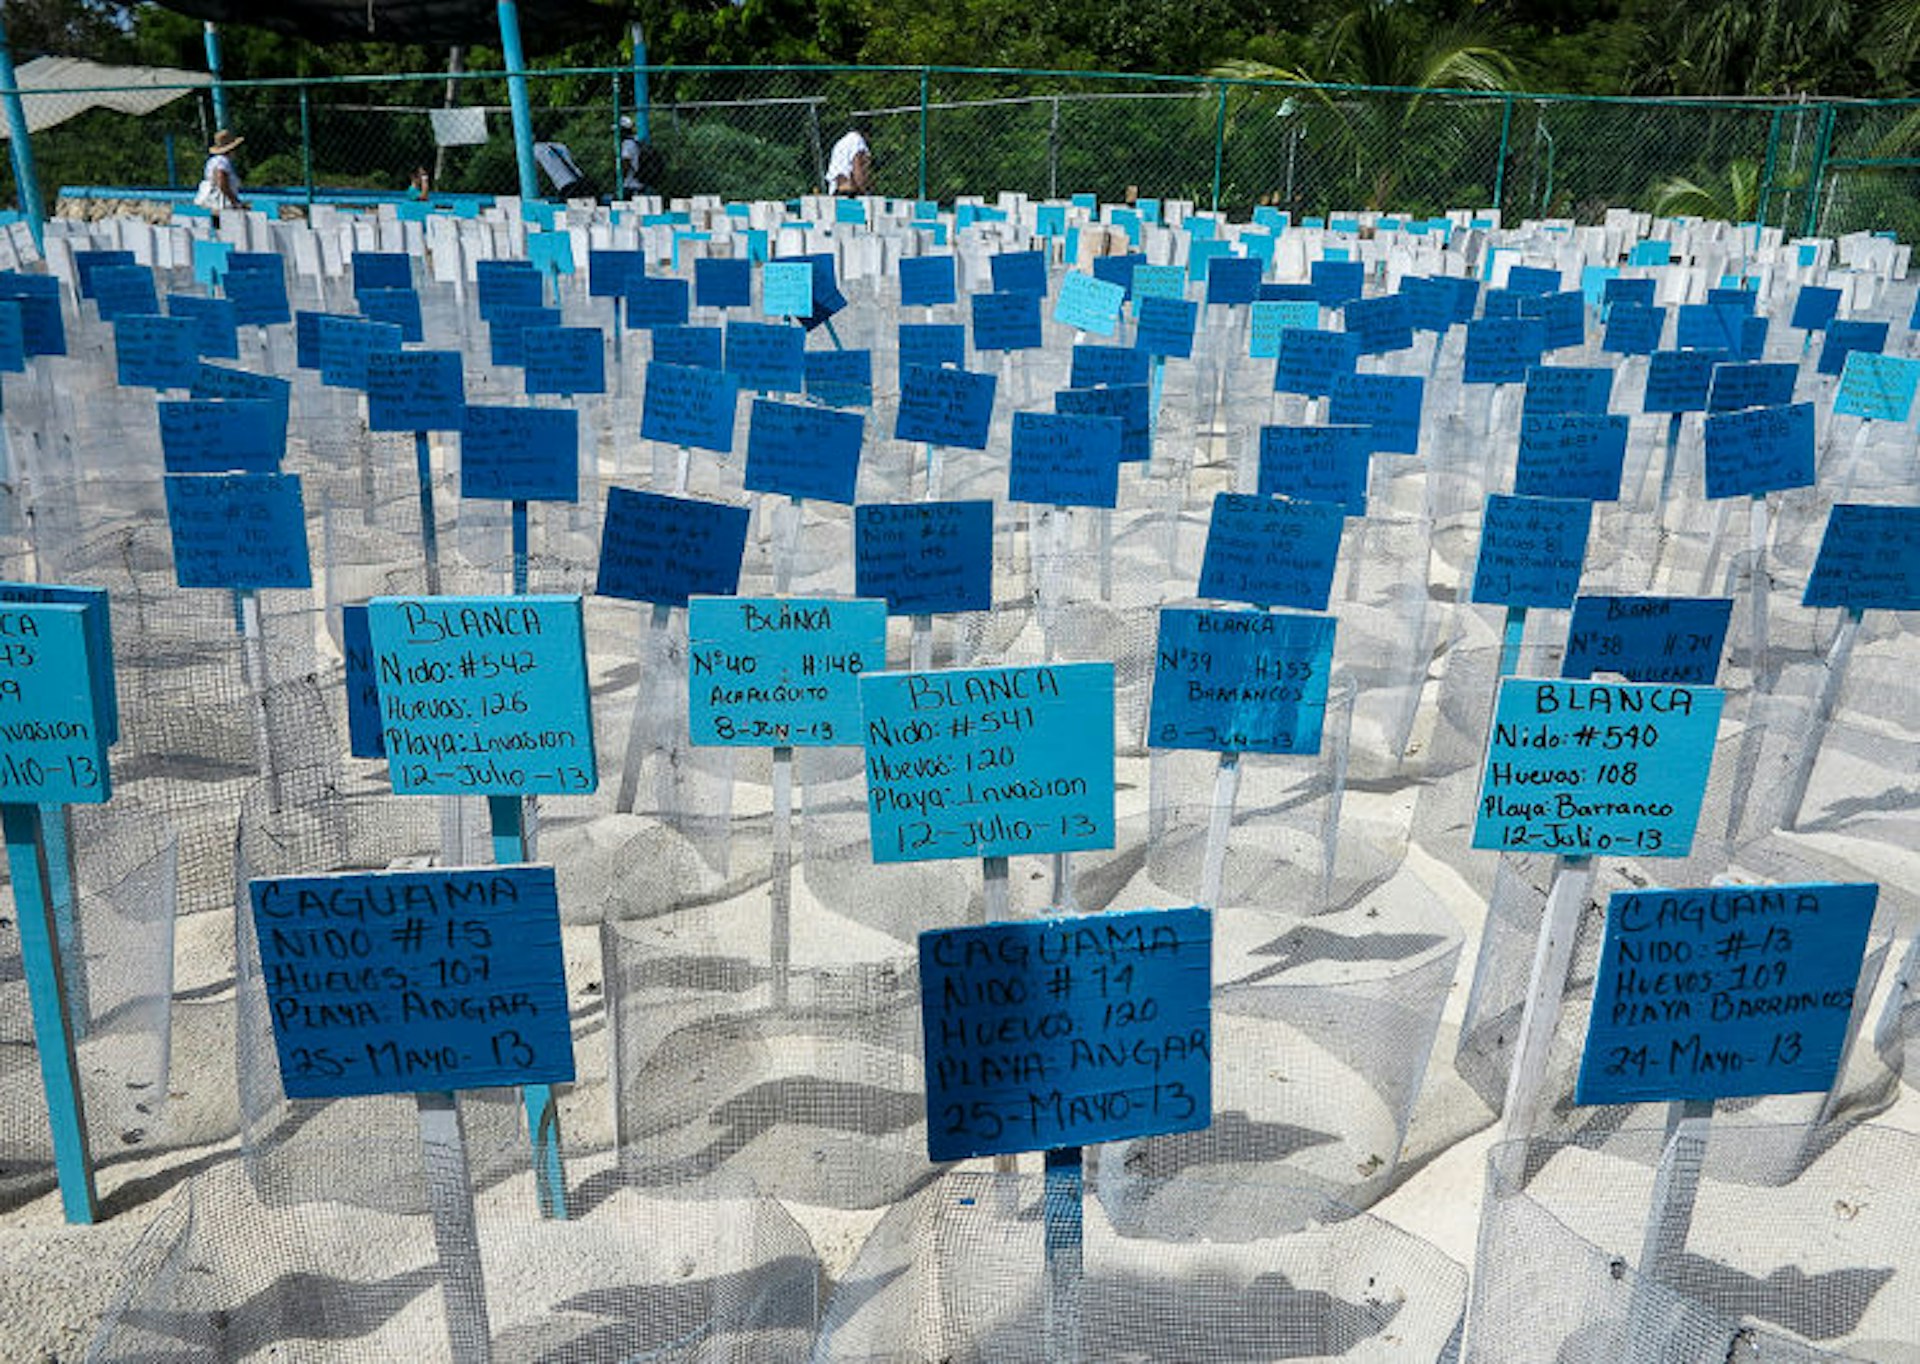 Turtle eggs labelled and waiting to hatch at the turtle sanctuary on Isla Mujeres. Image by Tim Buss / CC BY 2.0